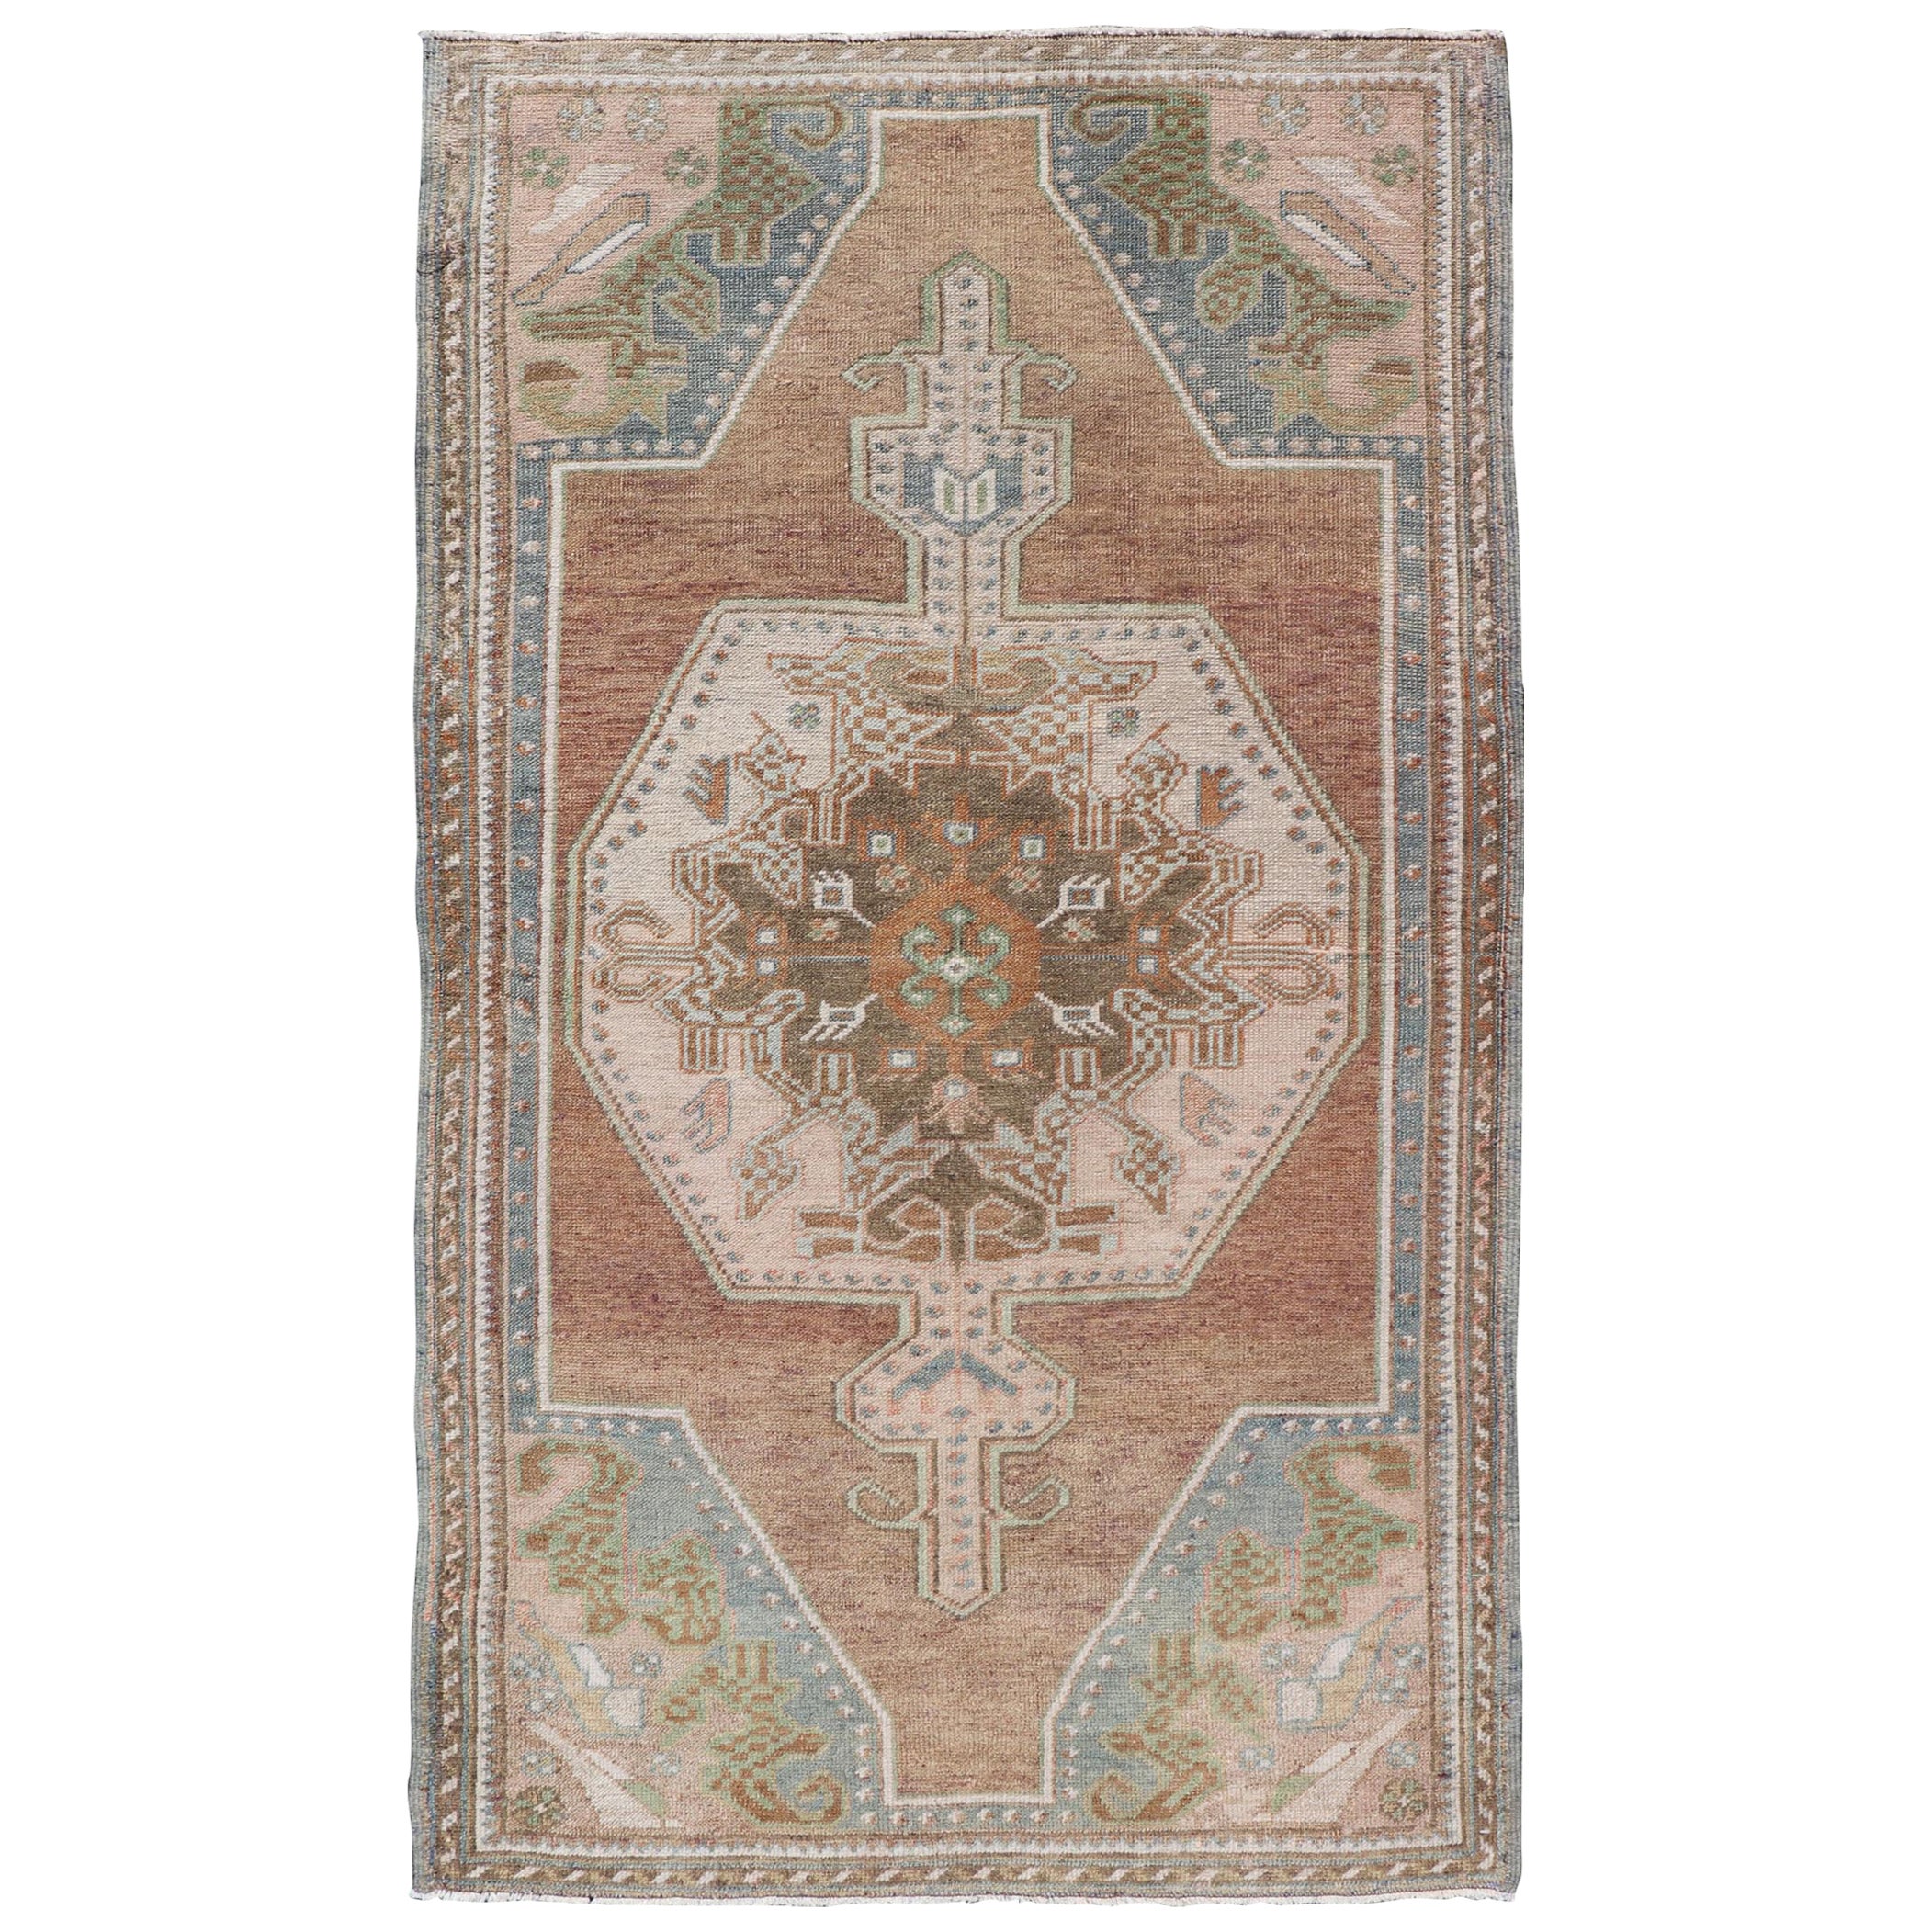 Vintage Oushak Rug in Light Brown Background and Cream, and Light Blue